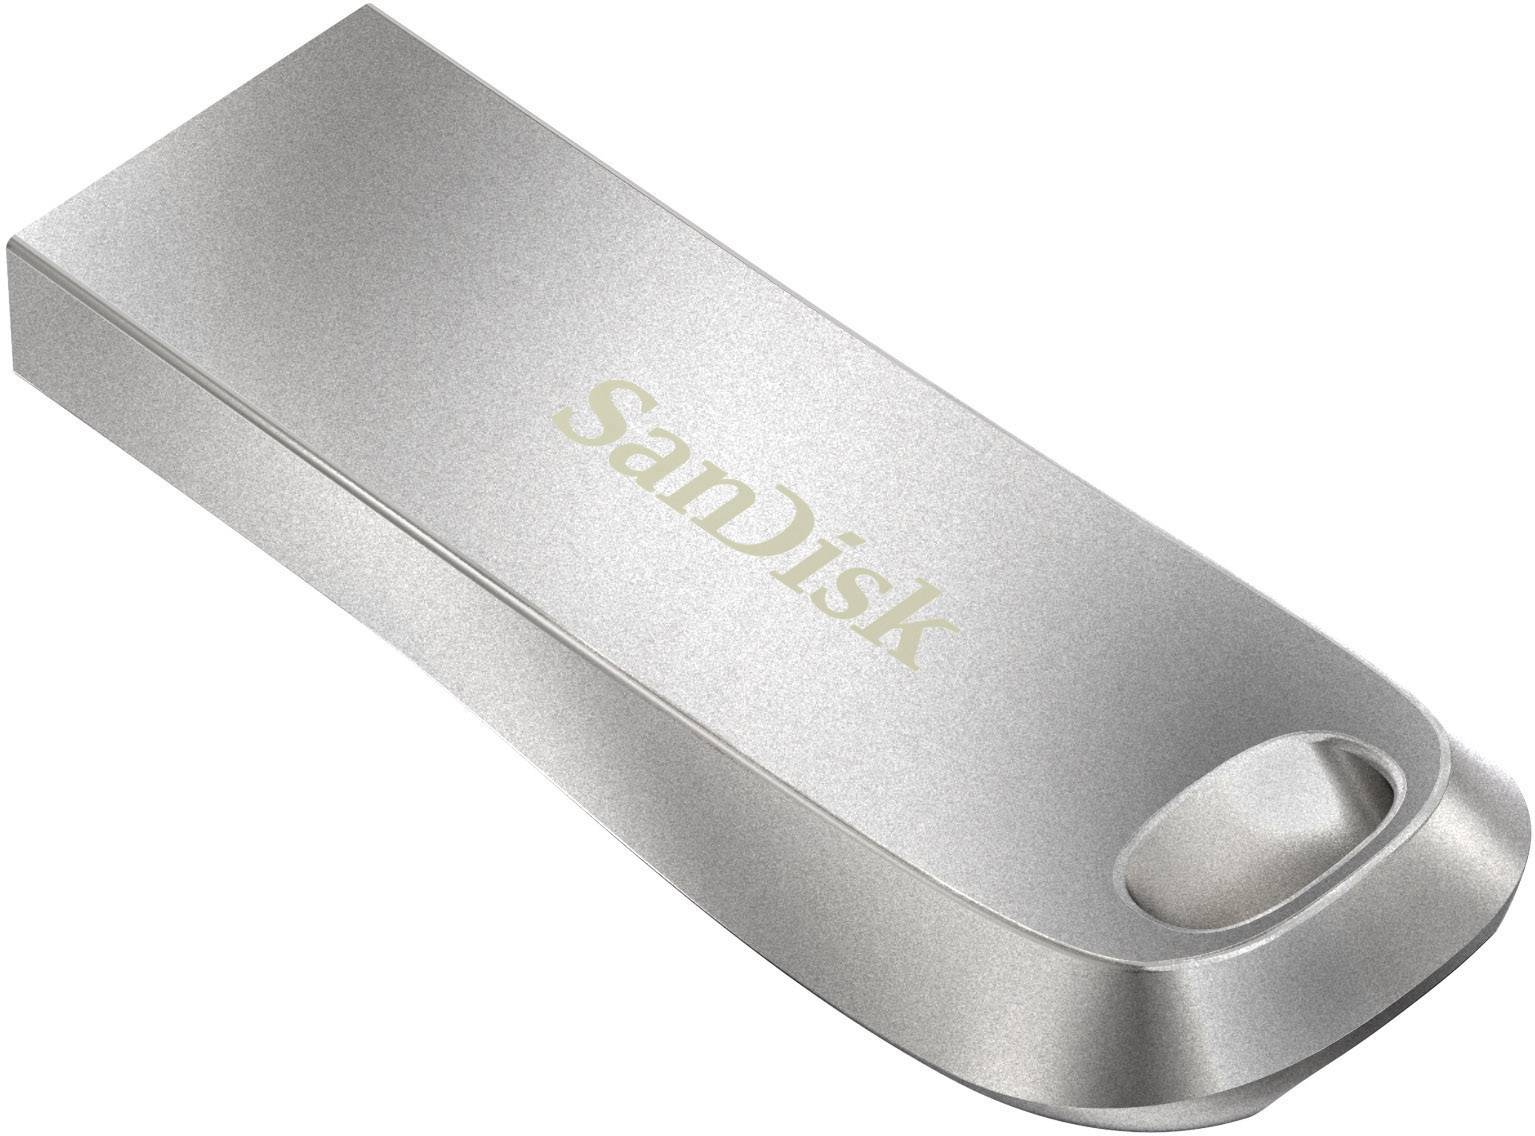 SANDISK ULTRA LUXE 64GB